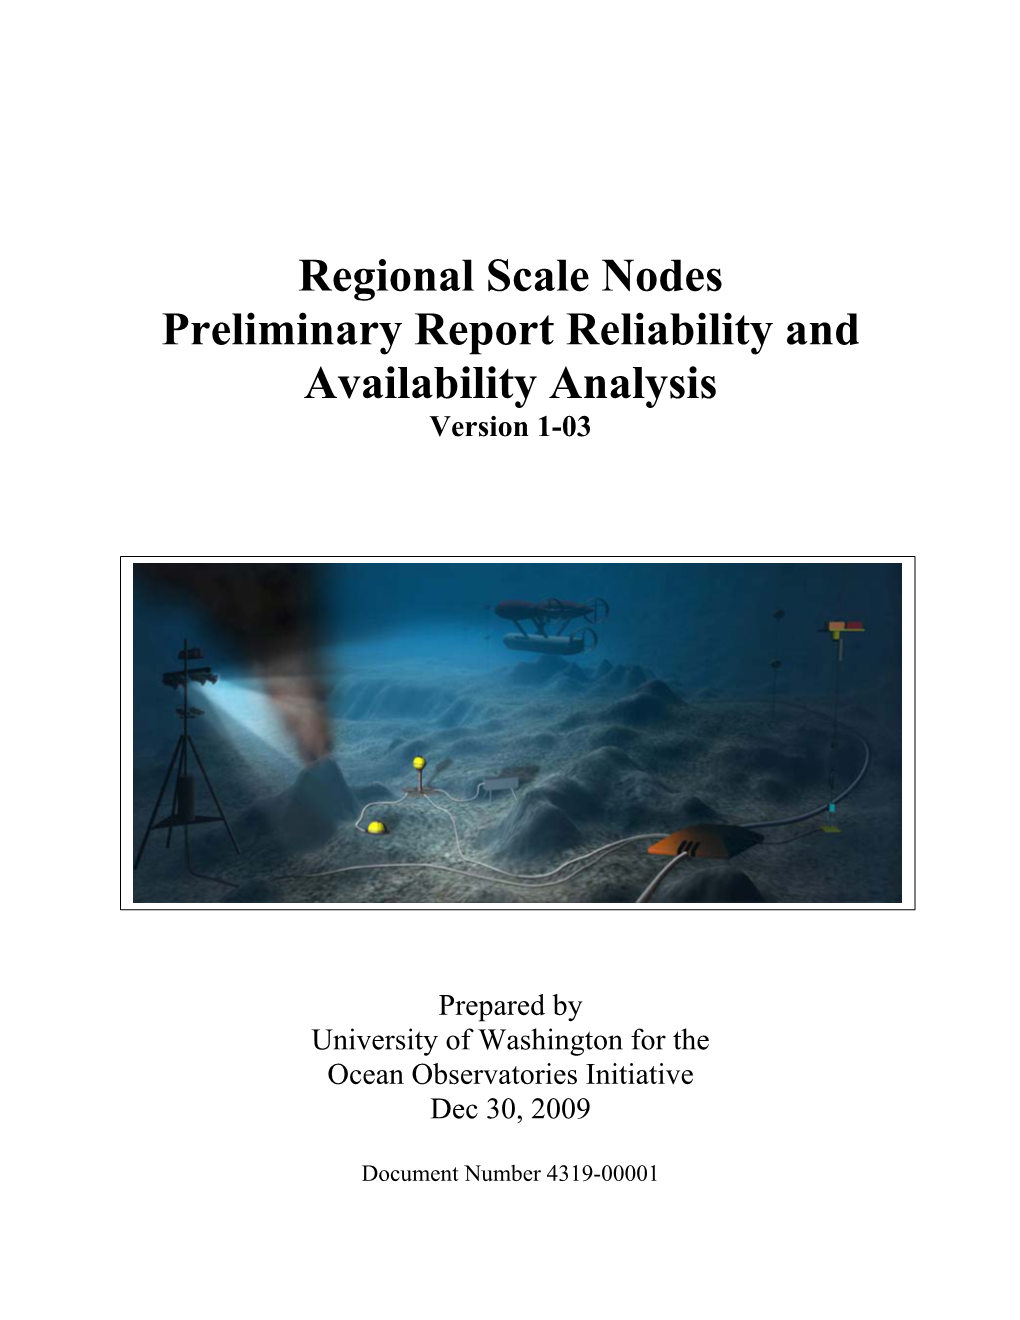 Regional Scale Nodes Preliminary Report Reliability and Availability Analysis Version 1-03